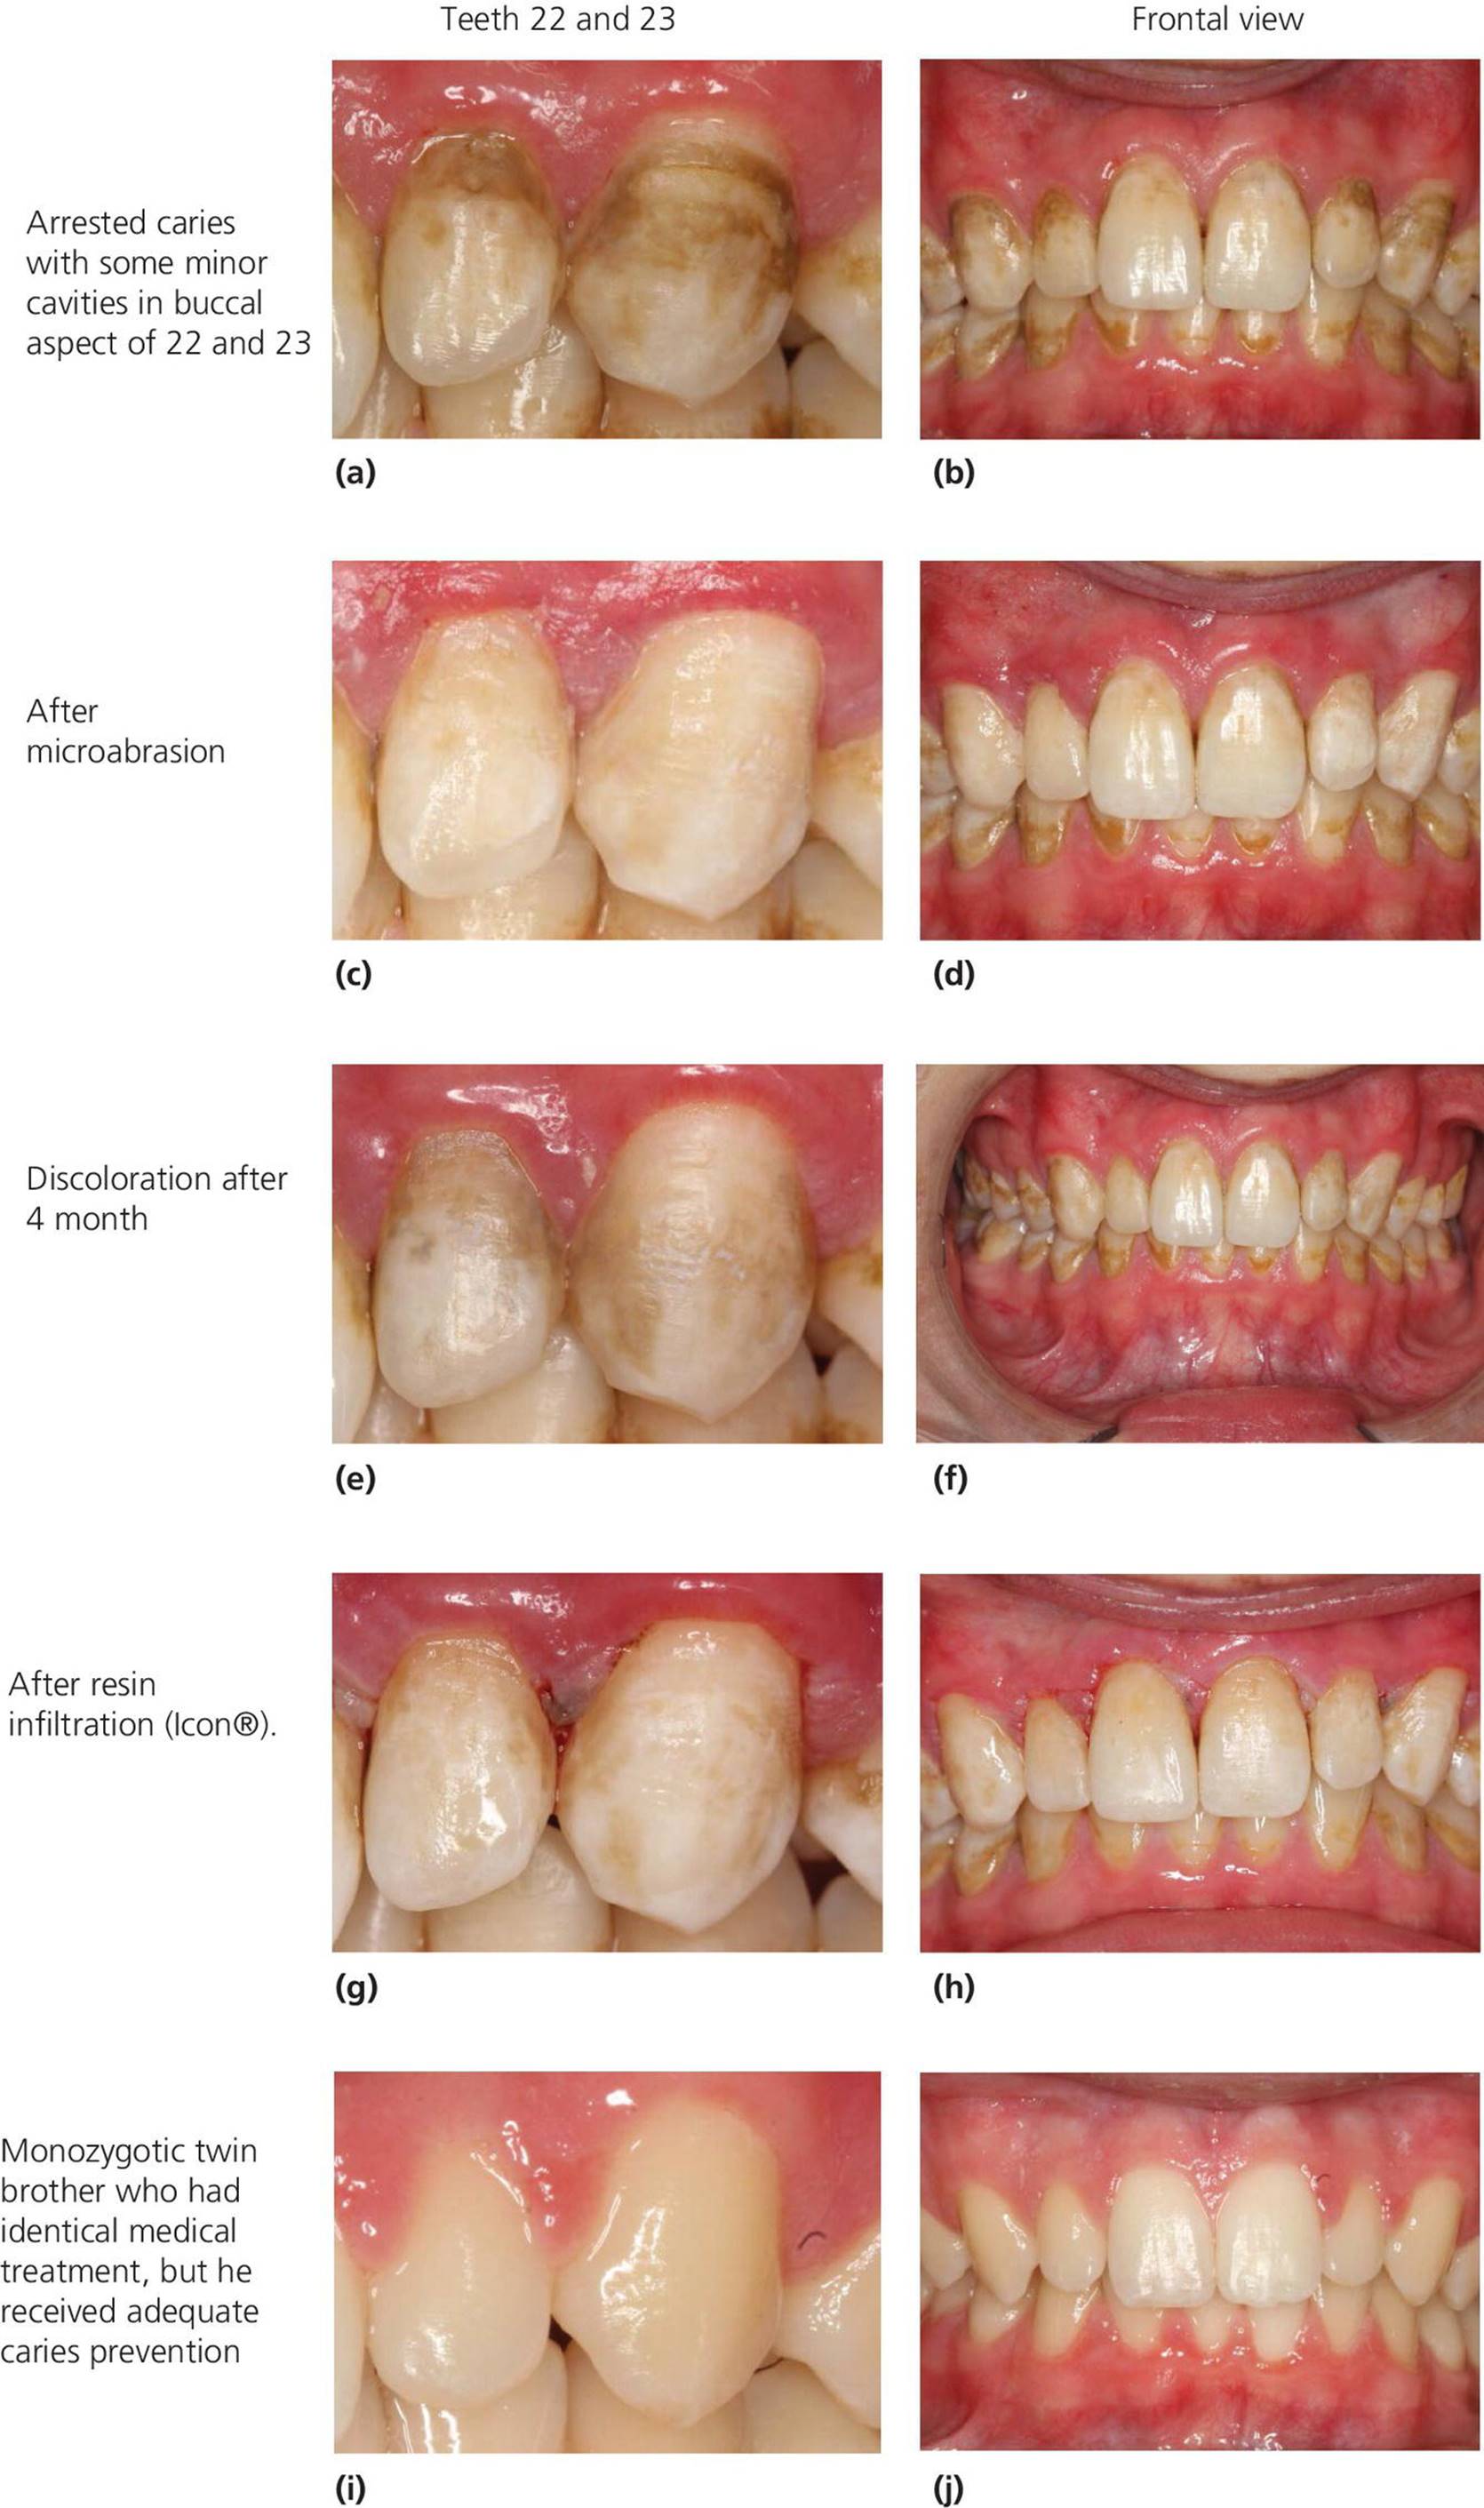 Photos of teeth 22 and 23 (left) and fontal views (right), (a,b) with caries and cavities, (c,d) after microabrasion, (e,f) discoloration after 4 month, (g,h) after resin infiltration, (i,j) and of the twin brother.